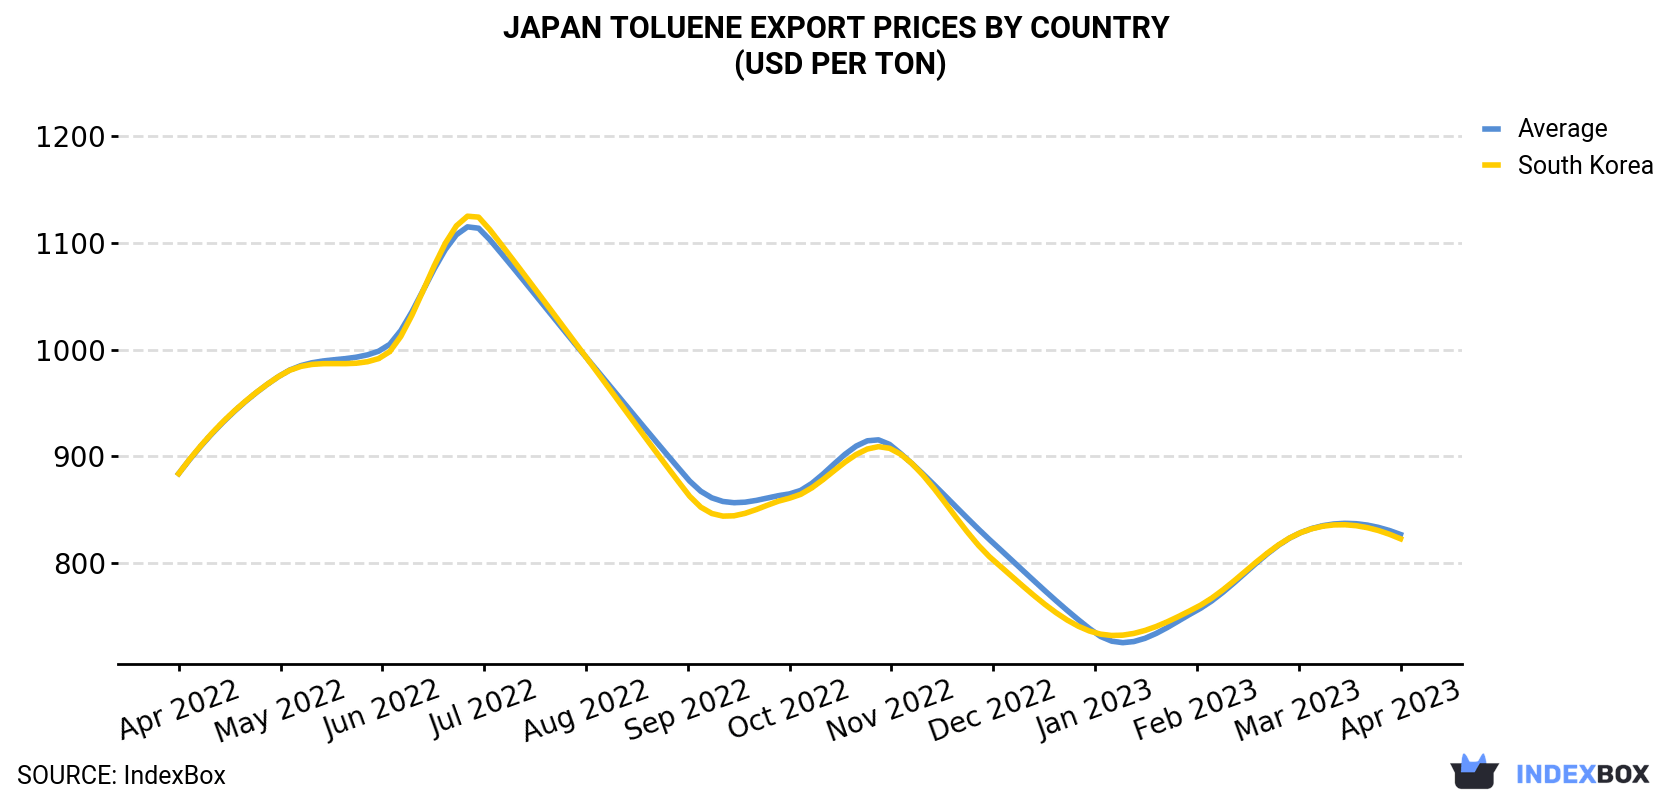 Japan Toluene Export Prices By Country (USD Per Ton)